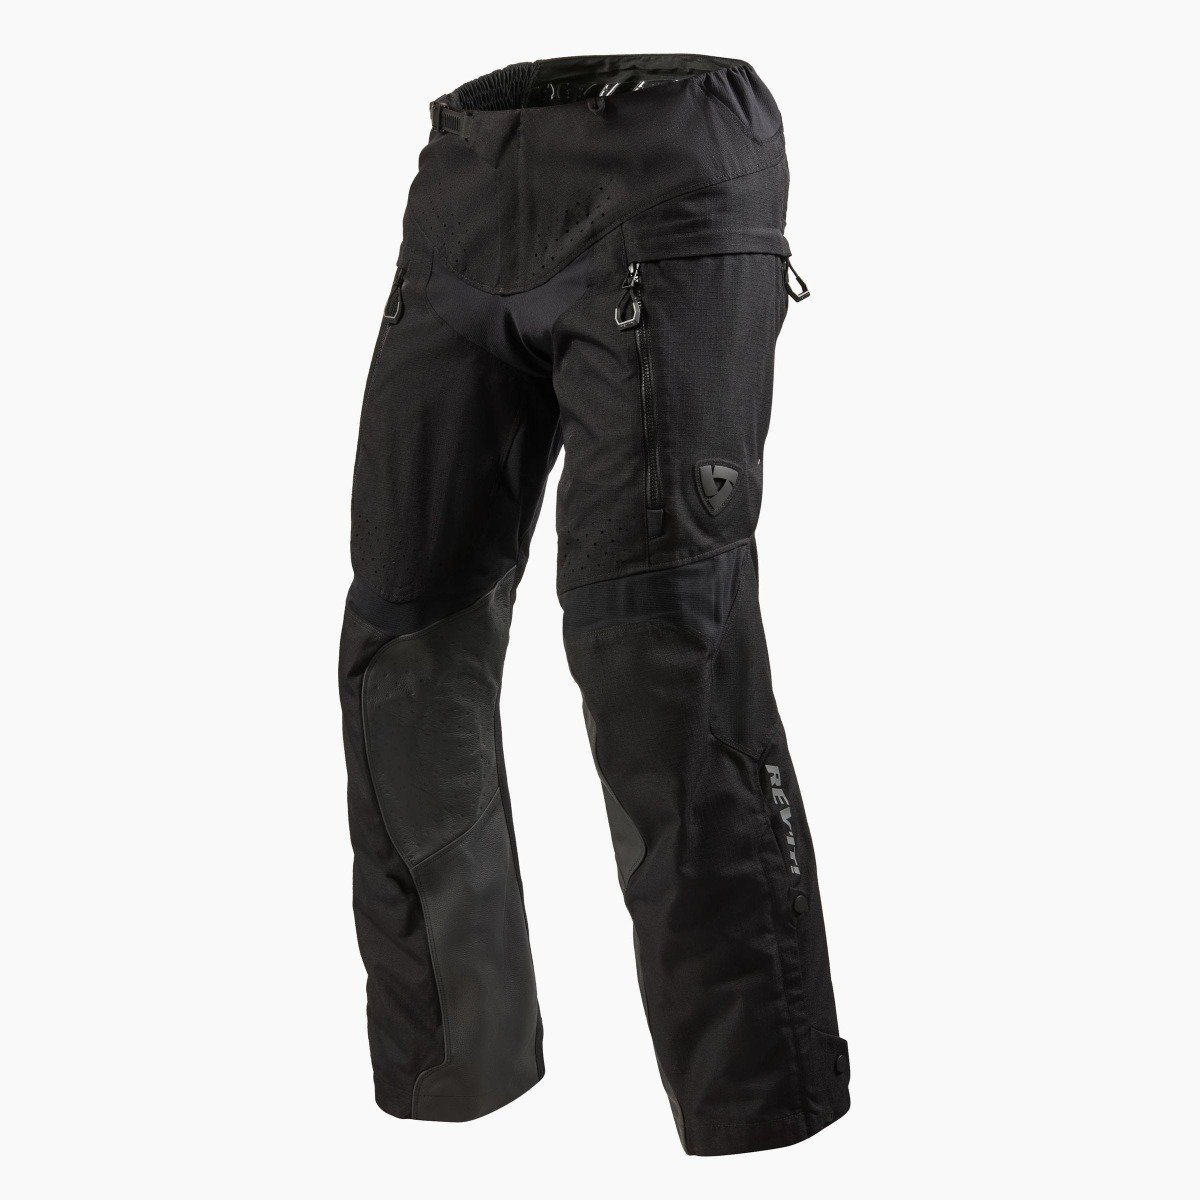 Image of REV'IT! Continent Black Motorcycle Pants Talla M